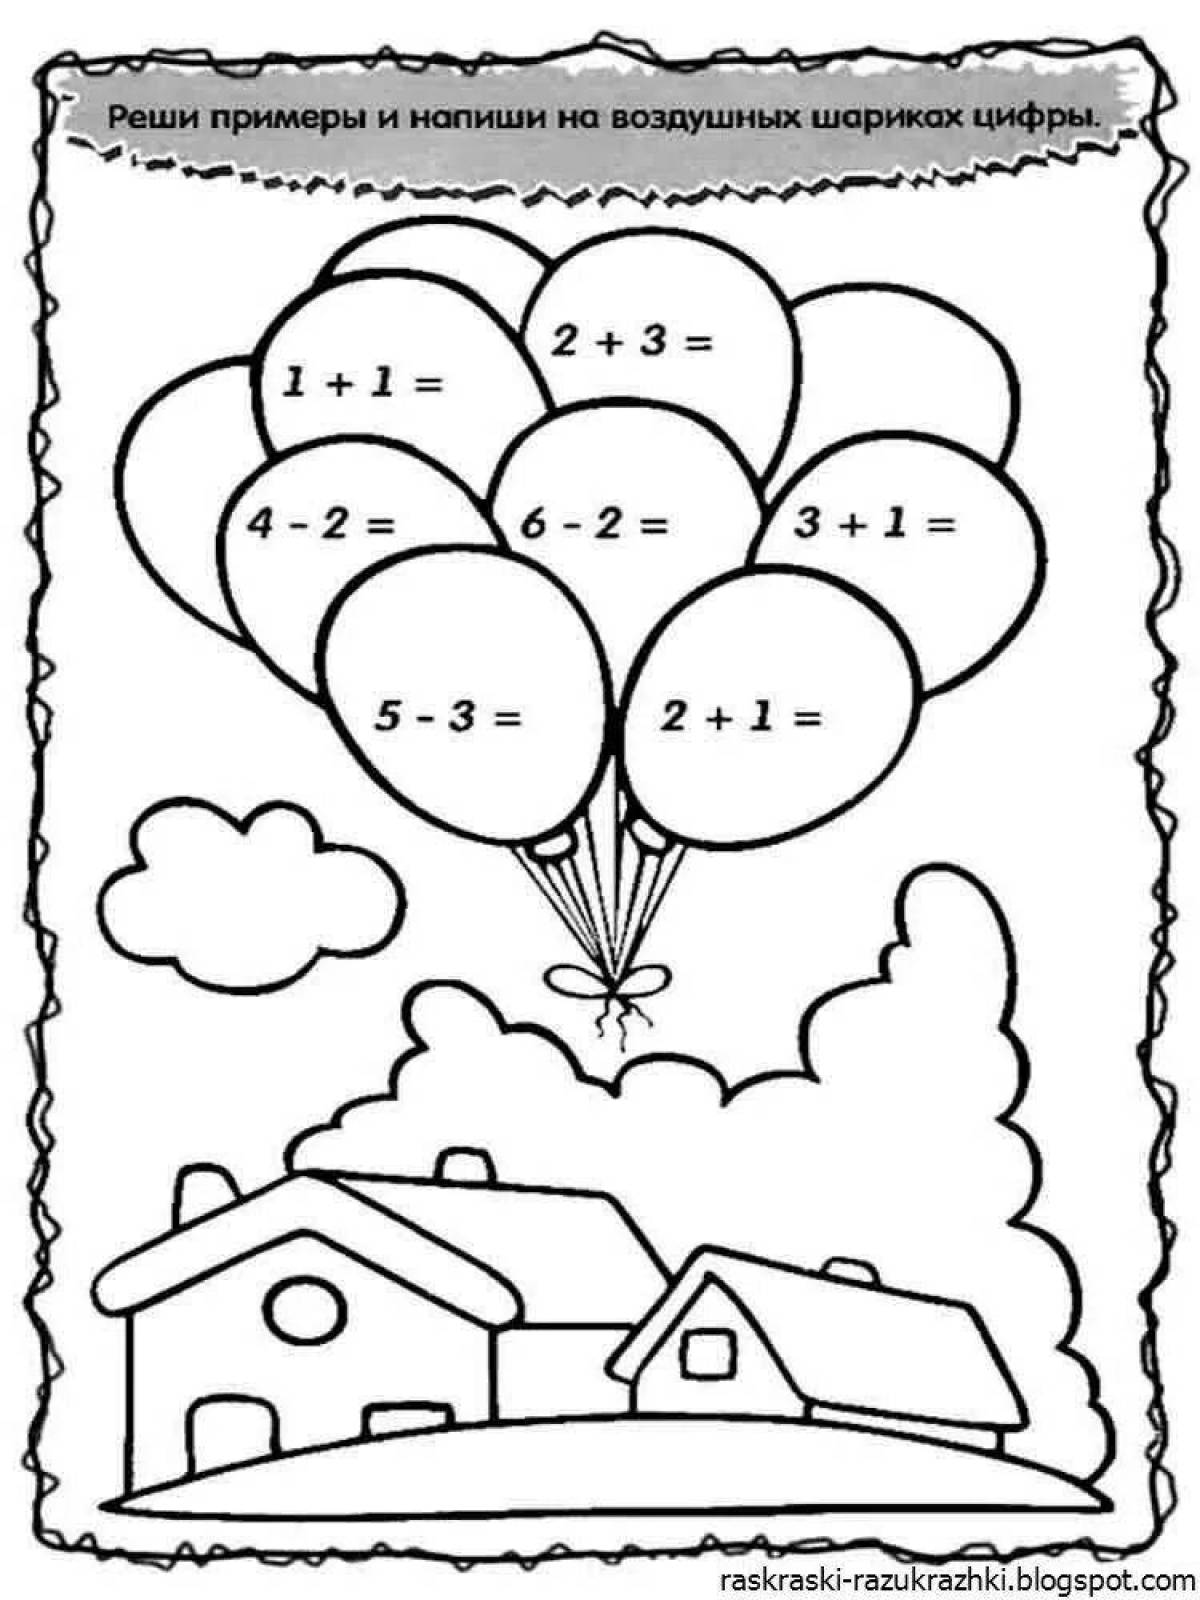 Joyful math coloring book for 6-7 year olds